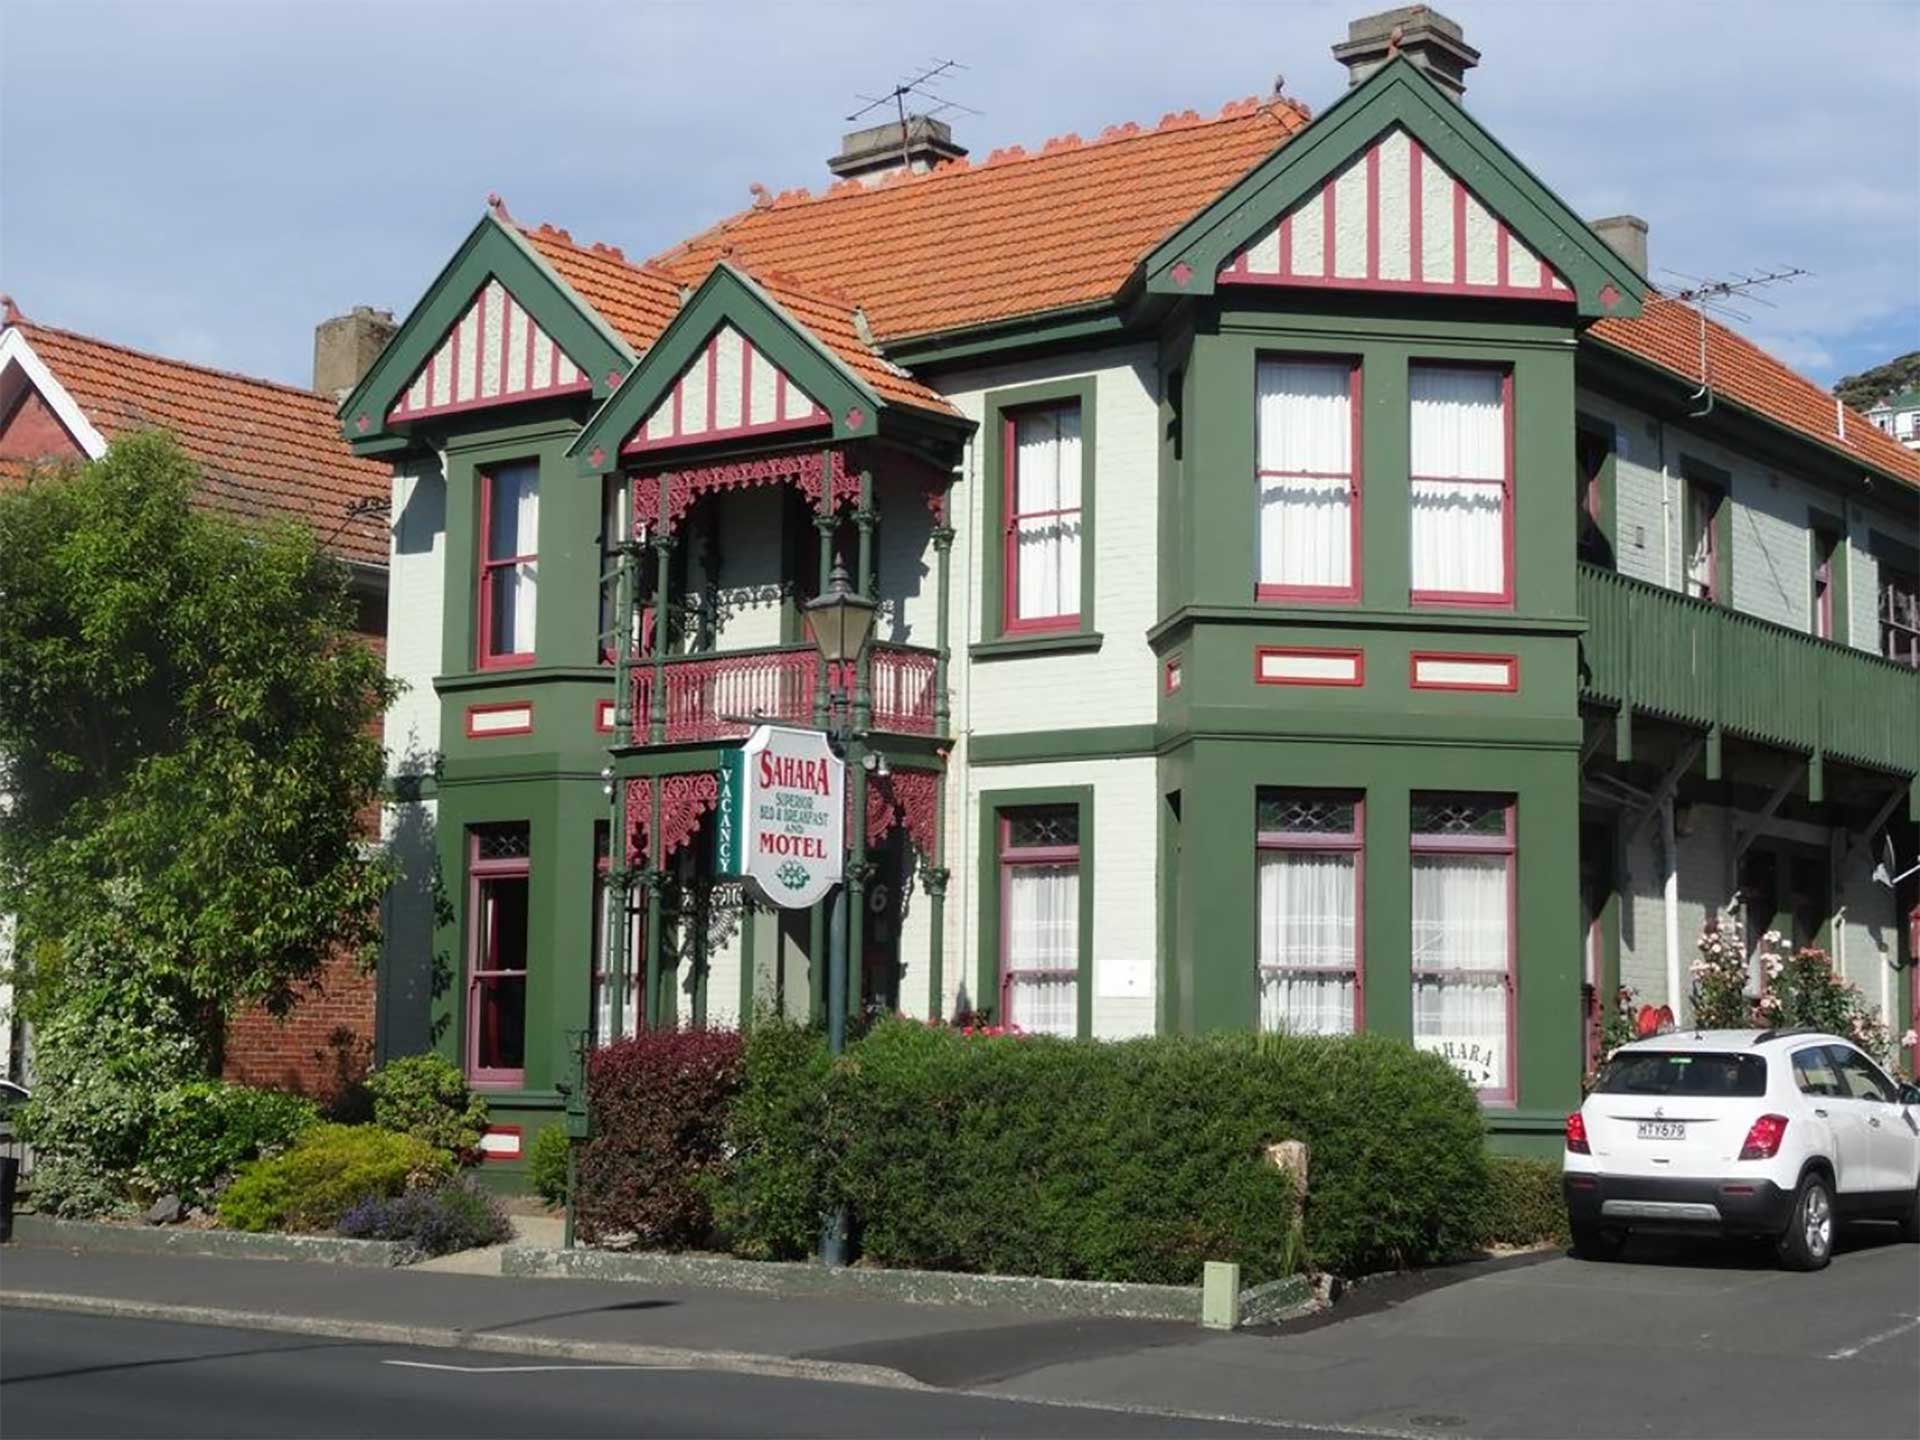 Dunedin Guesthouse and Bed & Breakfast